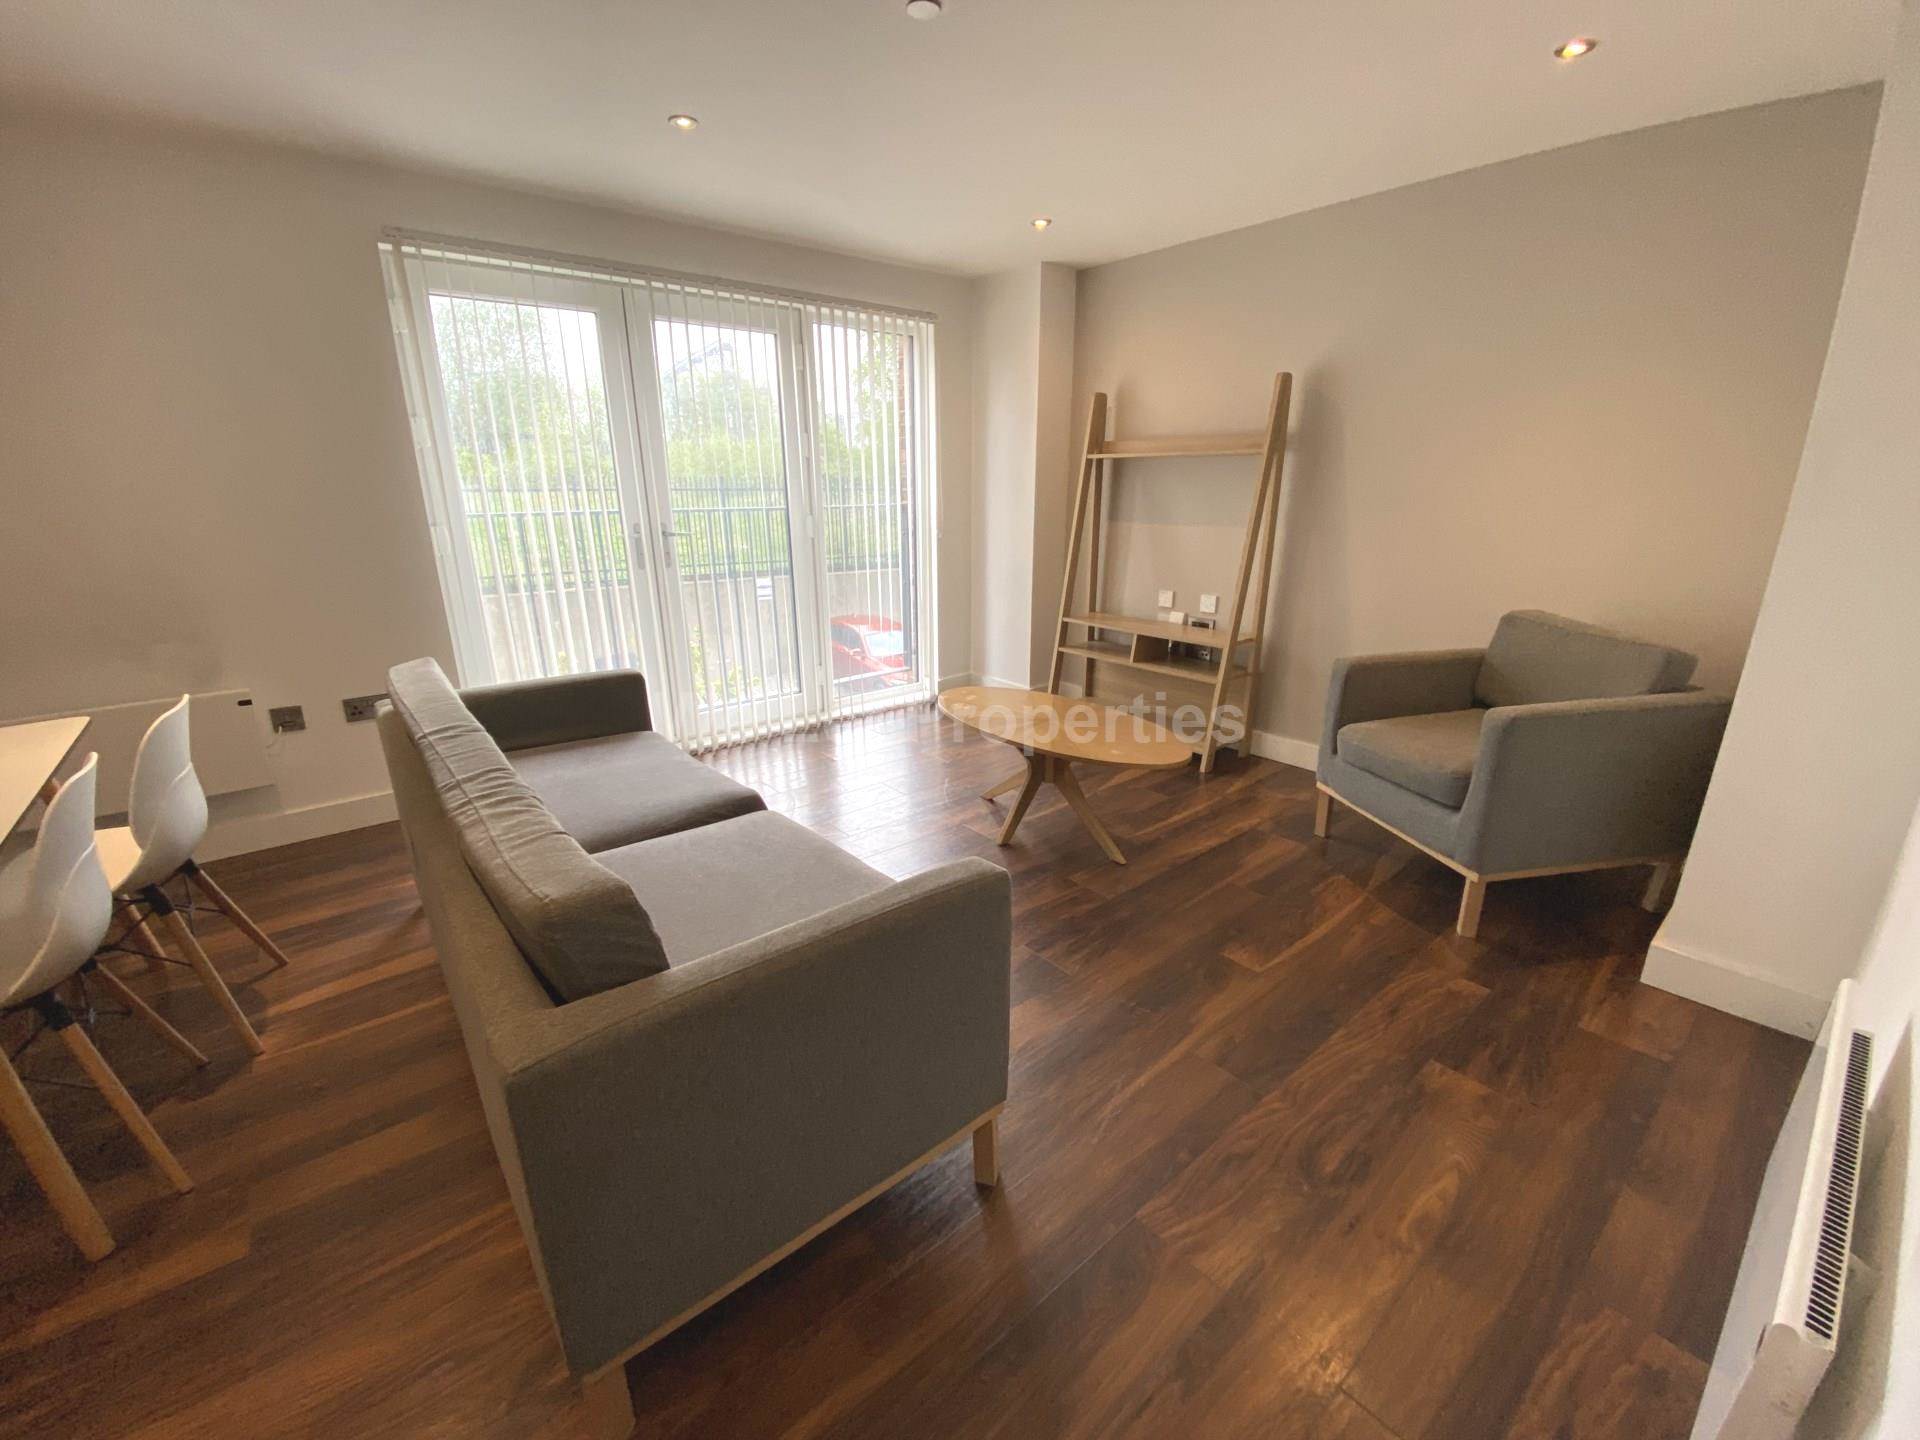 2 bed Apartment for rent in Salford. From We Let Properties - Manchester